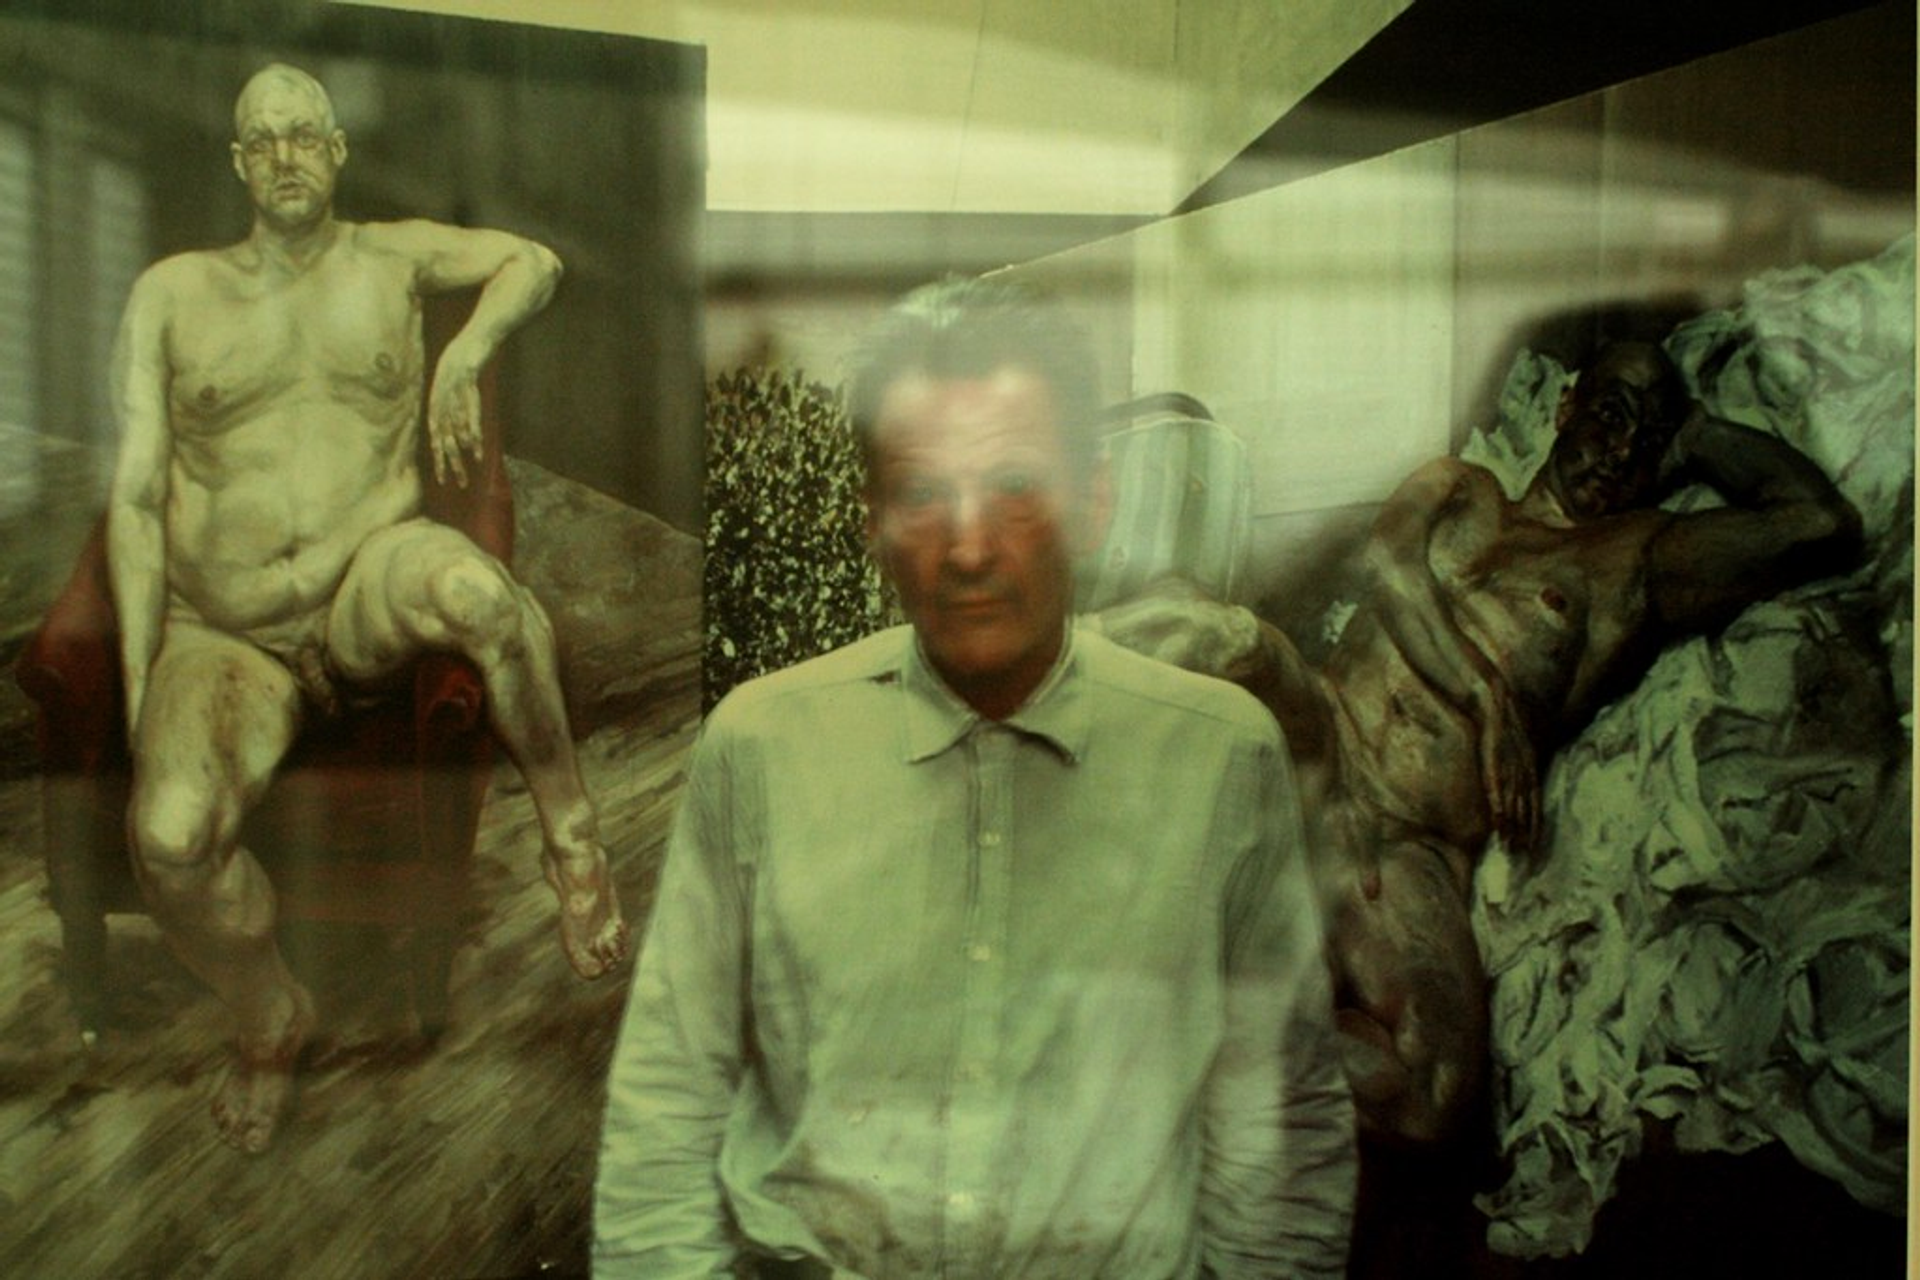 A photograph of the artist Lucian Freud standing in front of two portraits of Leigh Bowery in the nude.